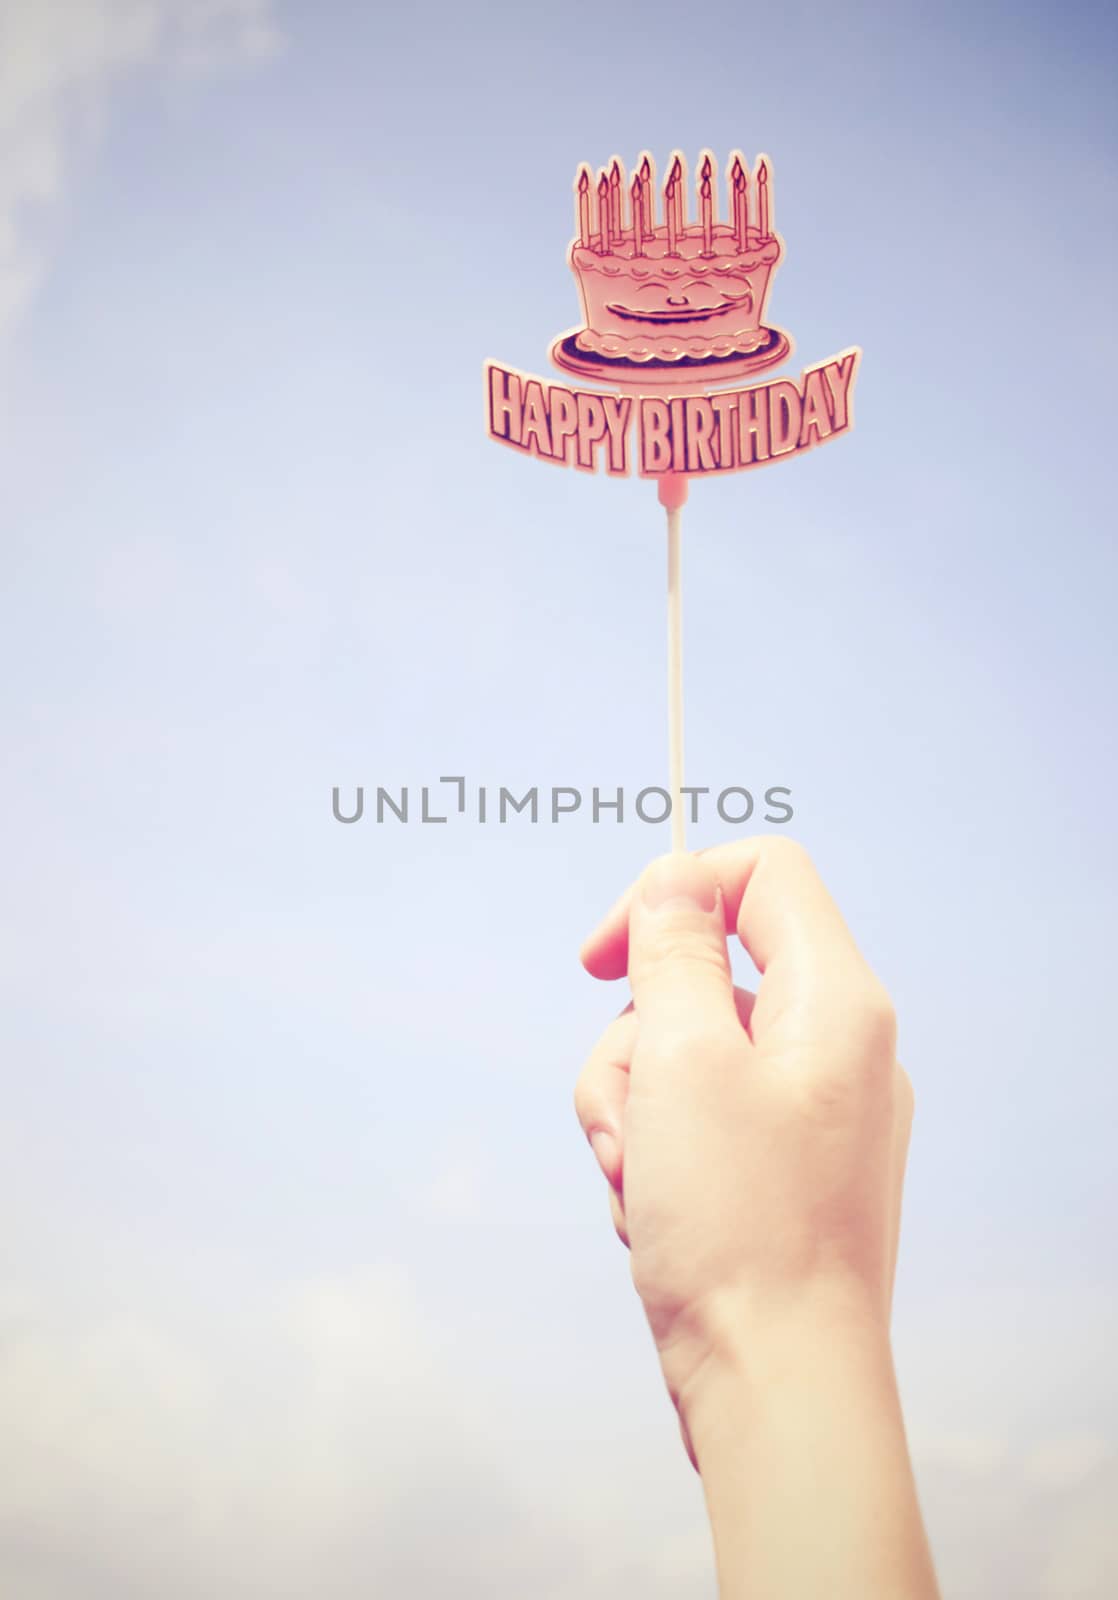 Hand holding happy birthday tag with blue sky, retro filter effe by nuchylee